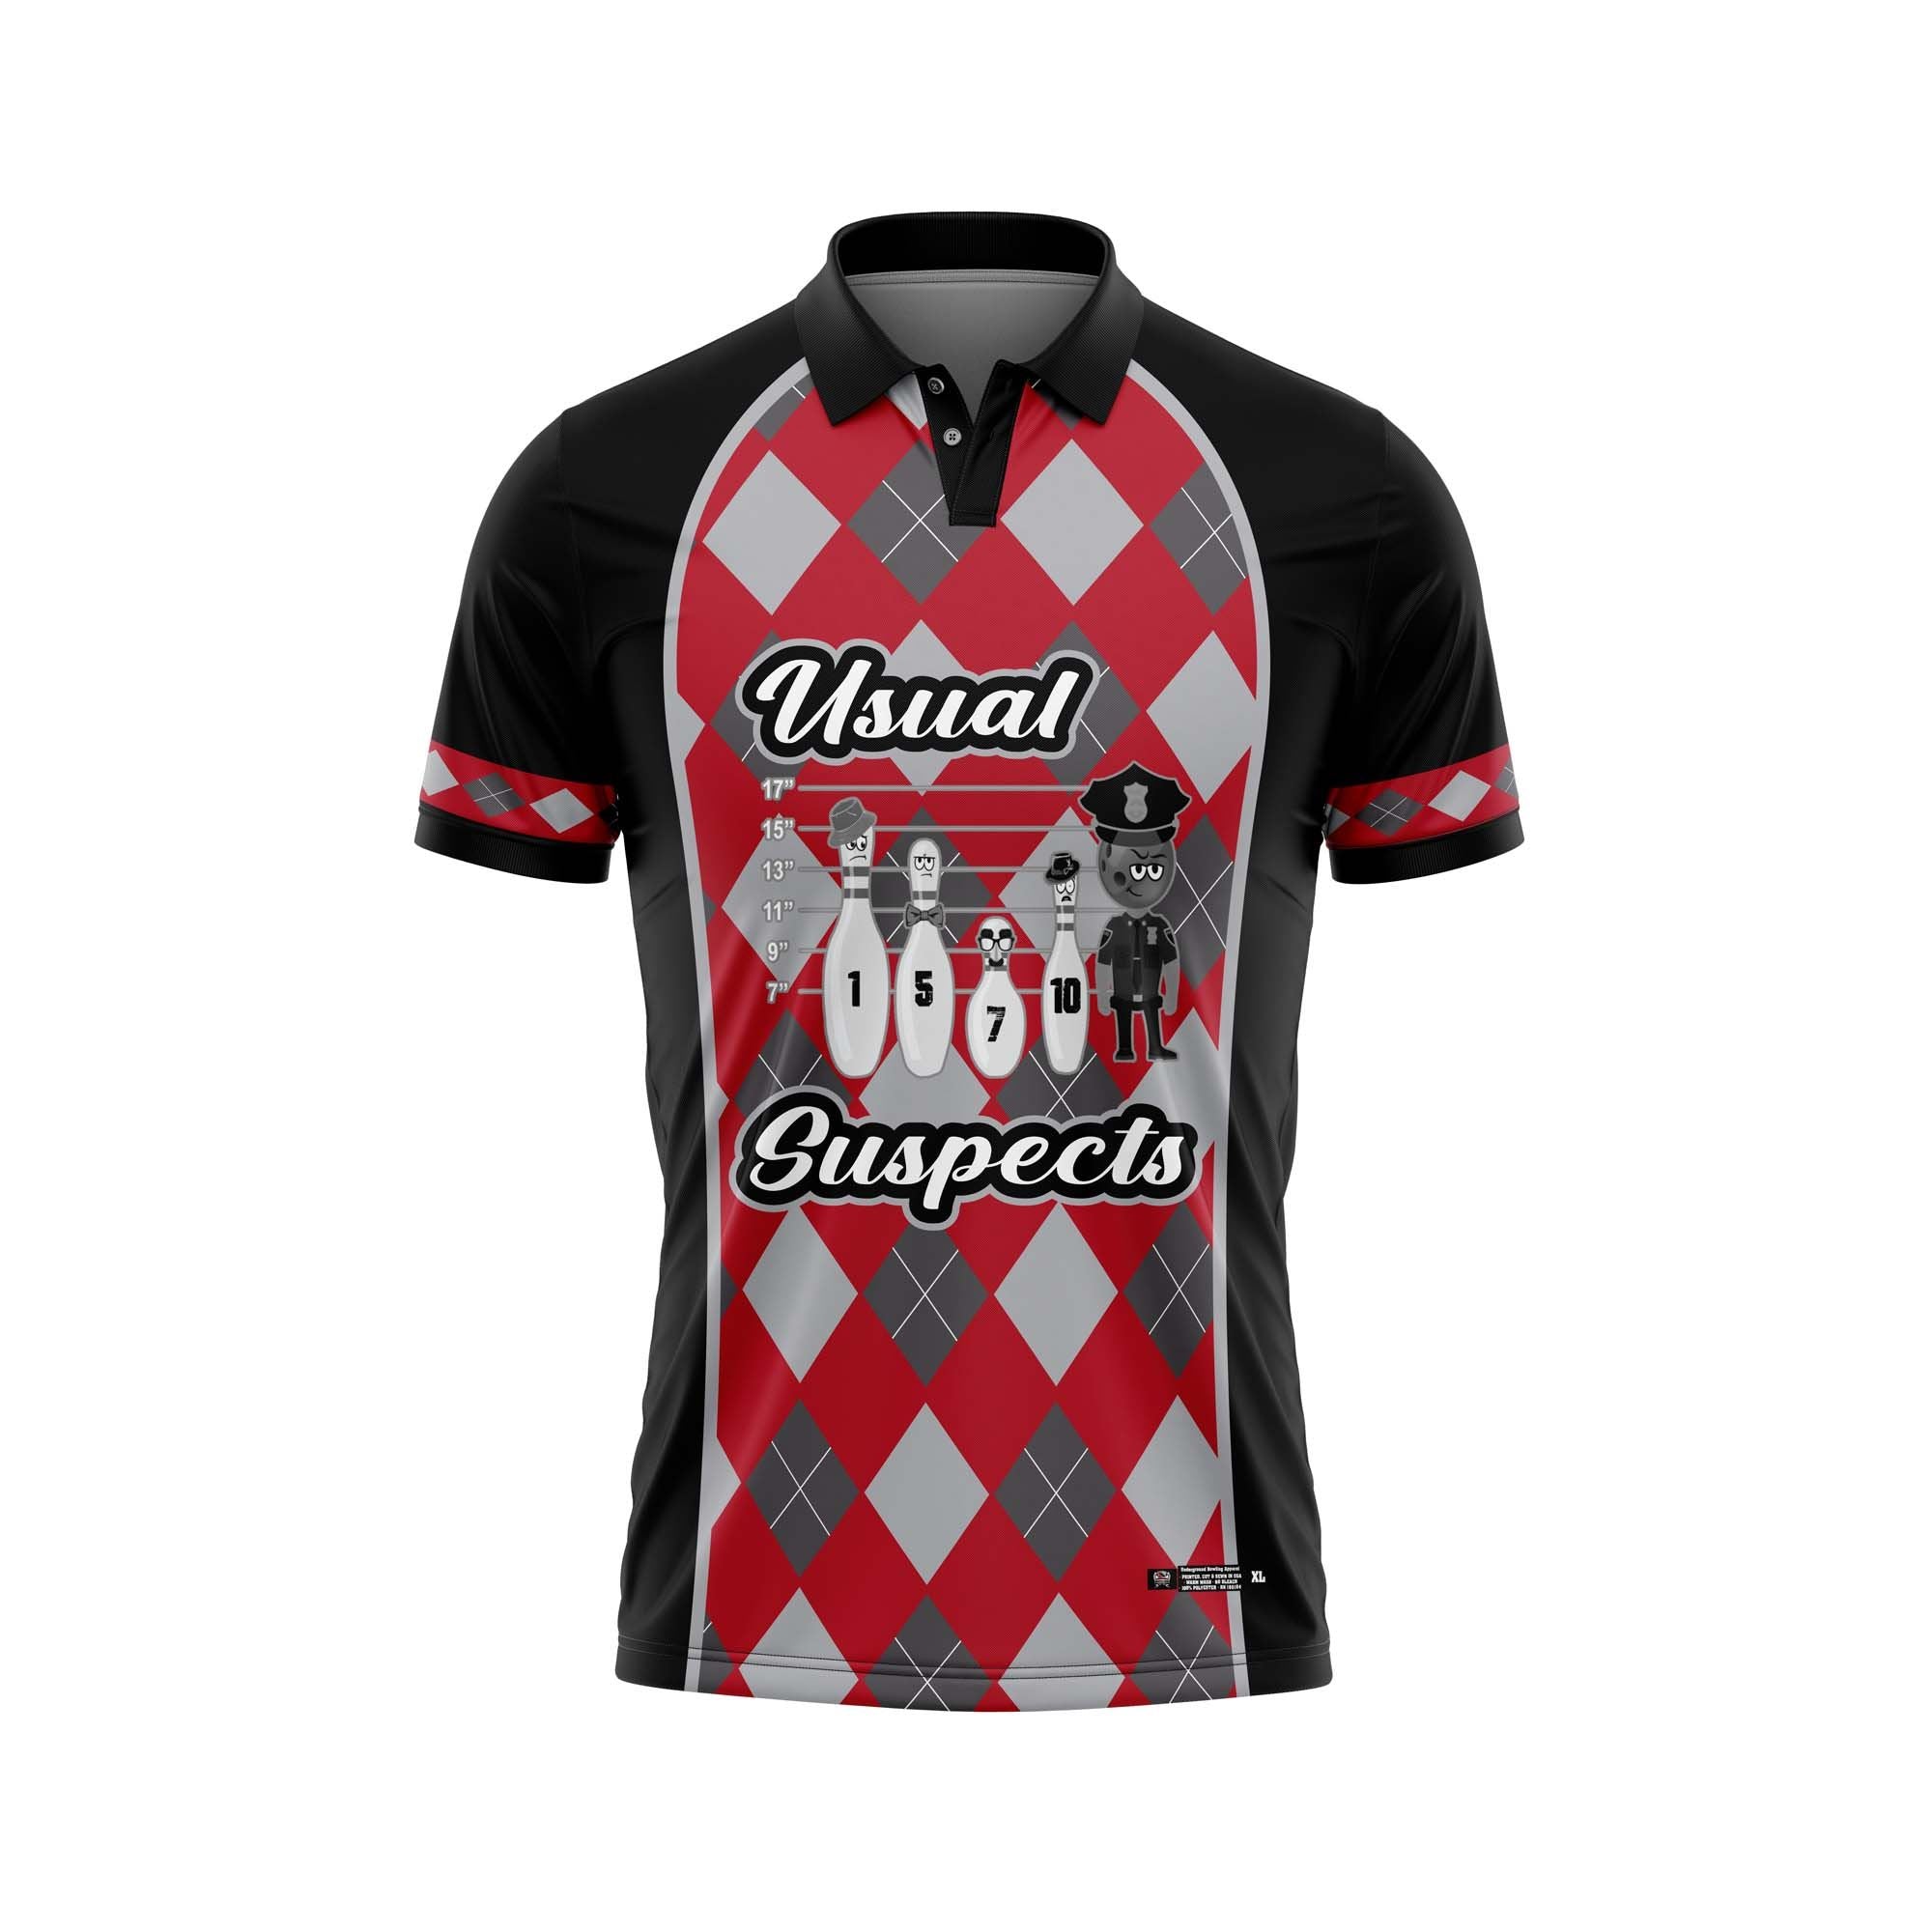 Usual Suspects Argyle Jersey